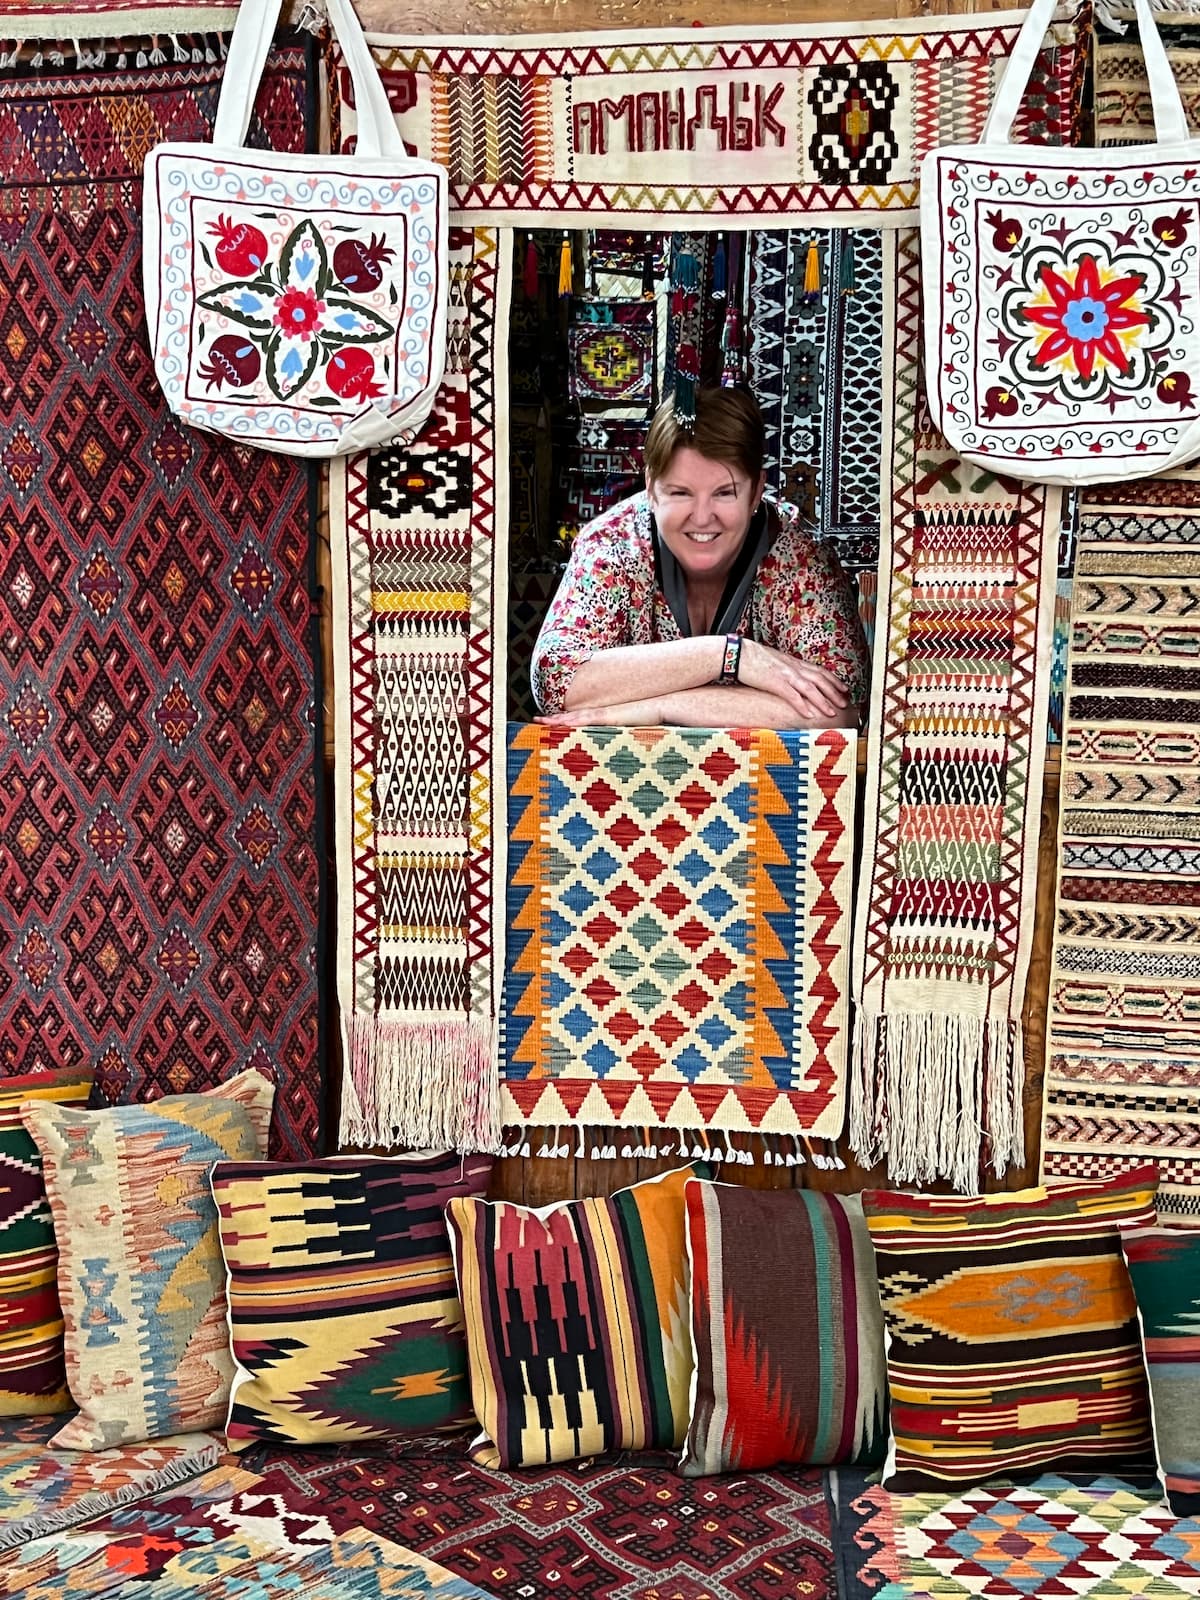 Tour guide Nicole in amongst woven blankets